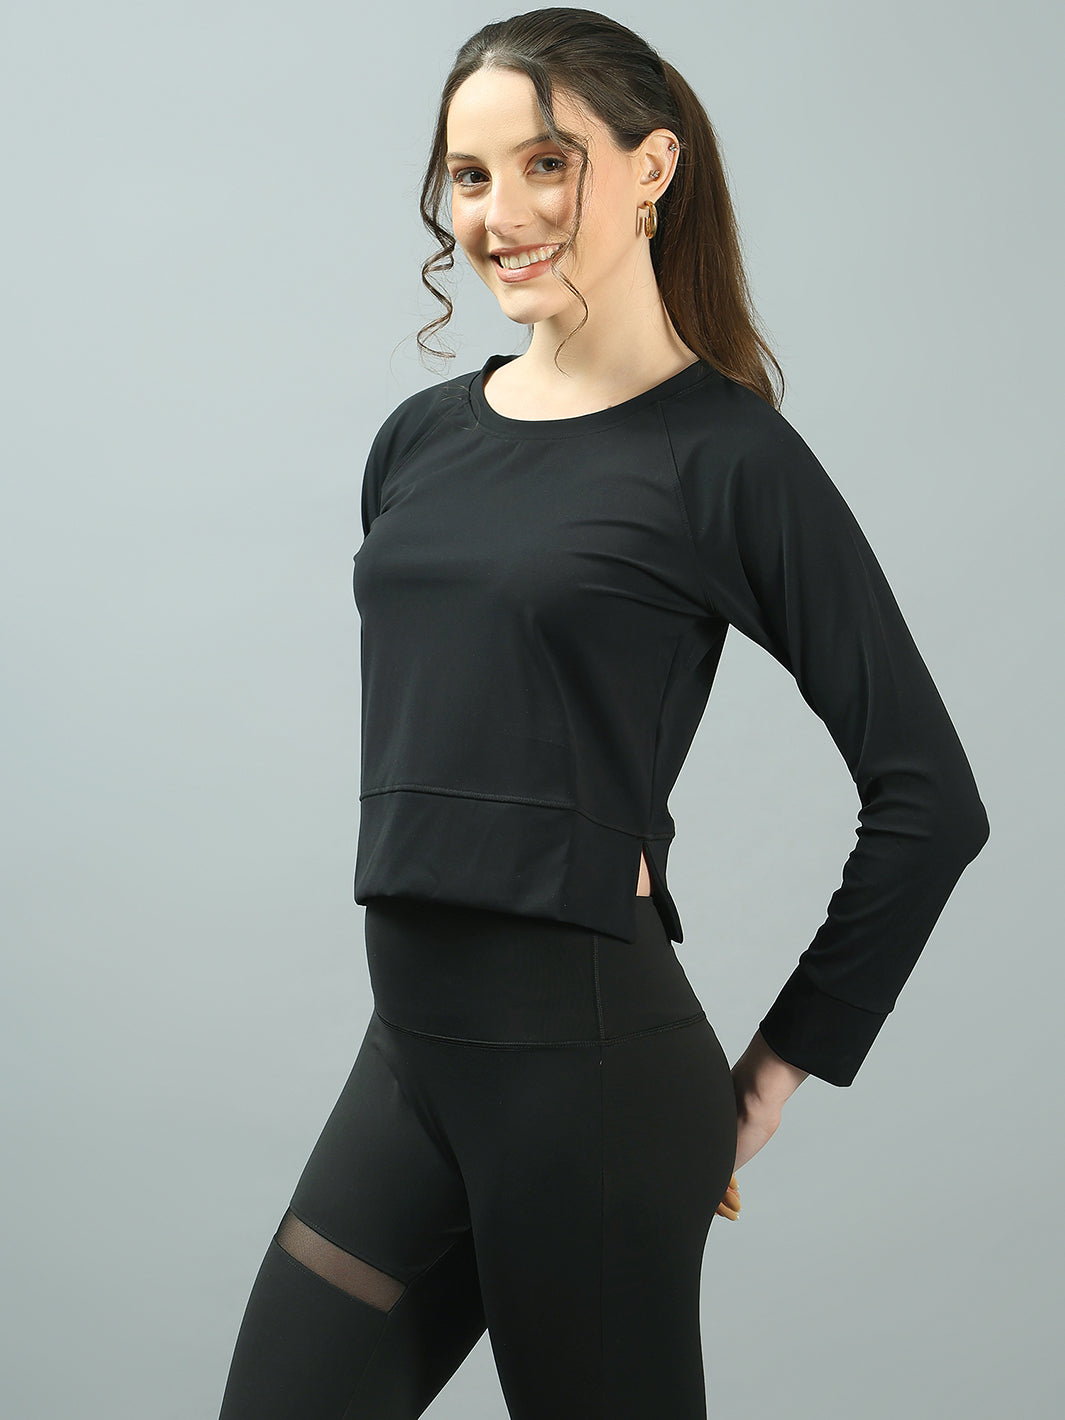 Softretch All Seasons Breathable Top | Full sleeves Sports Top